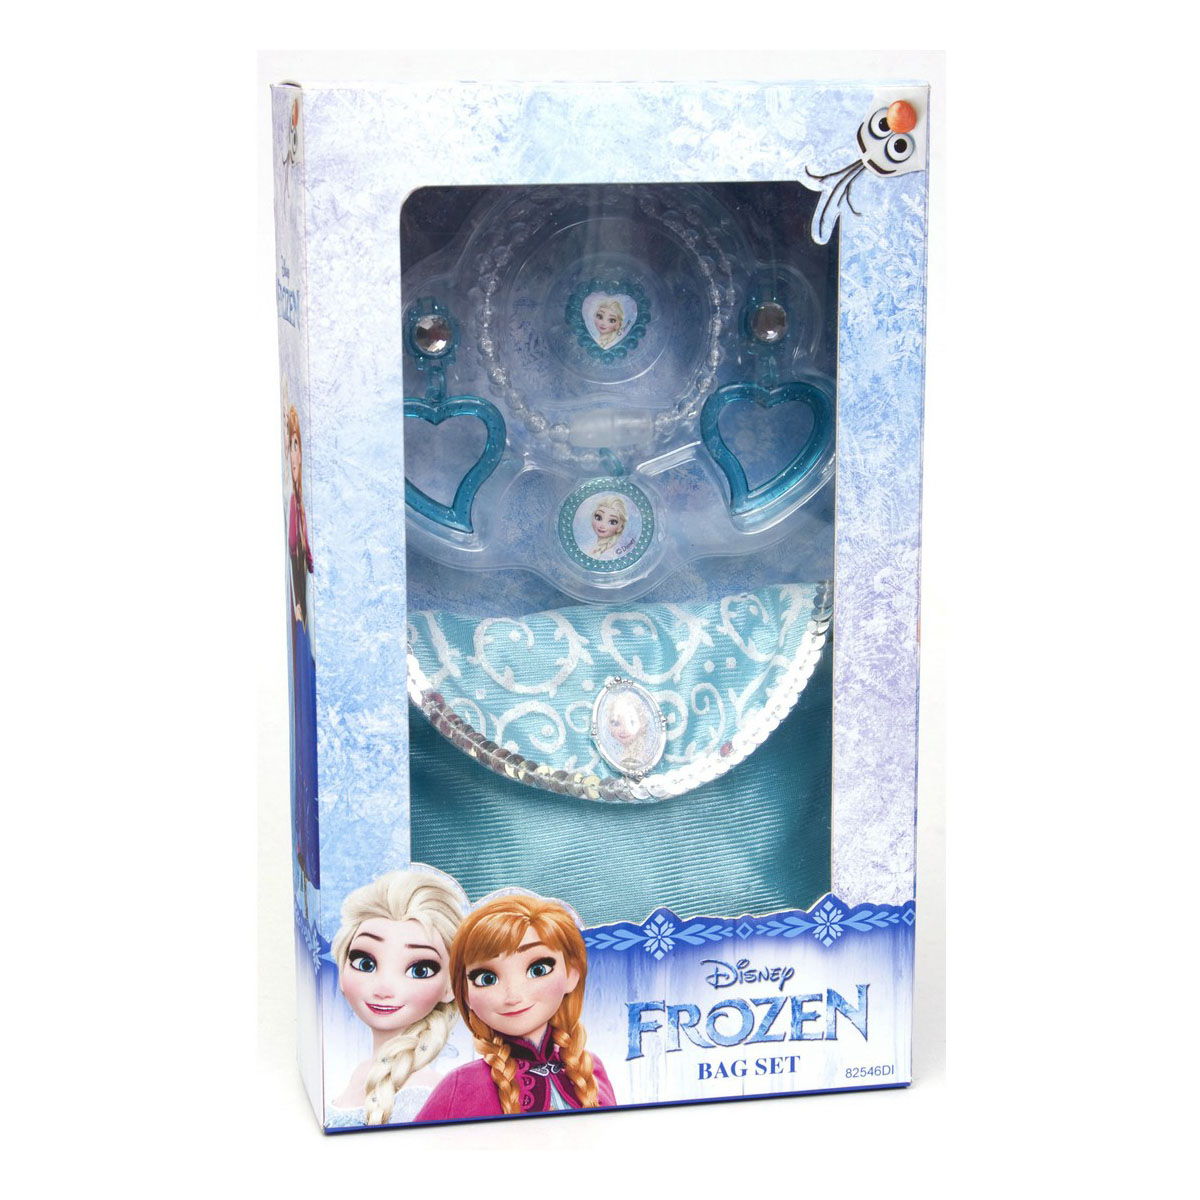 Disney Frozen Bag with Accessories for Girls